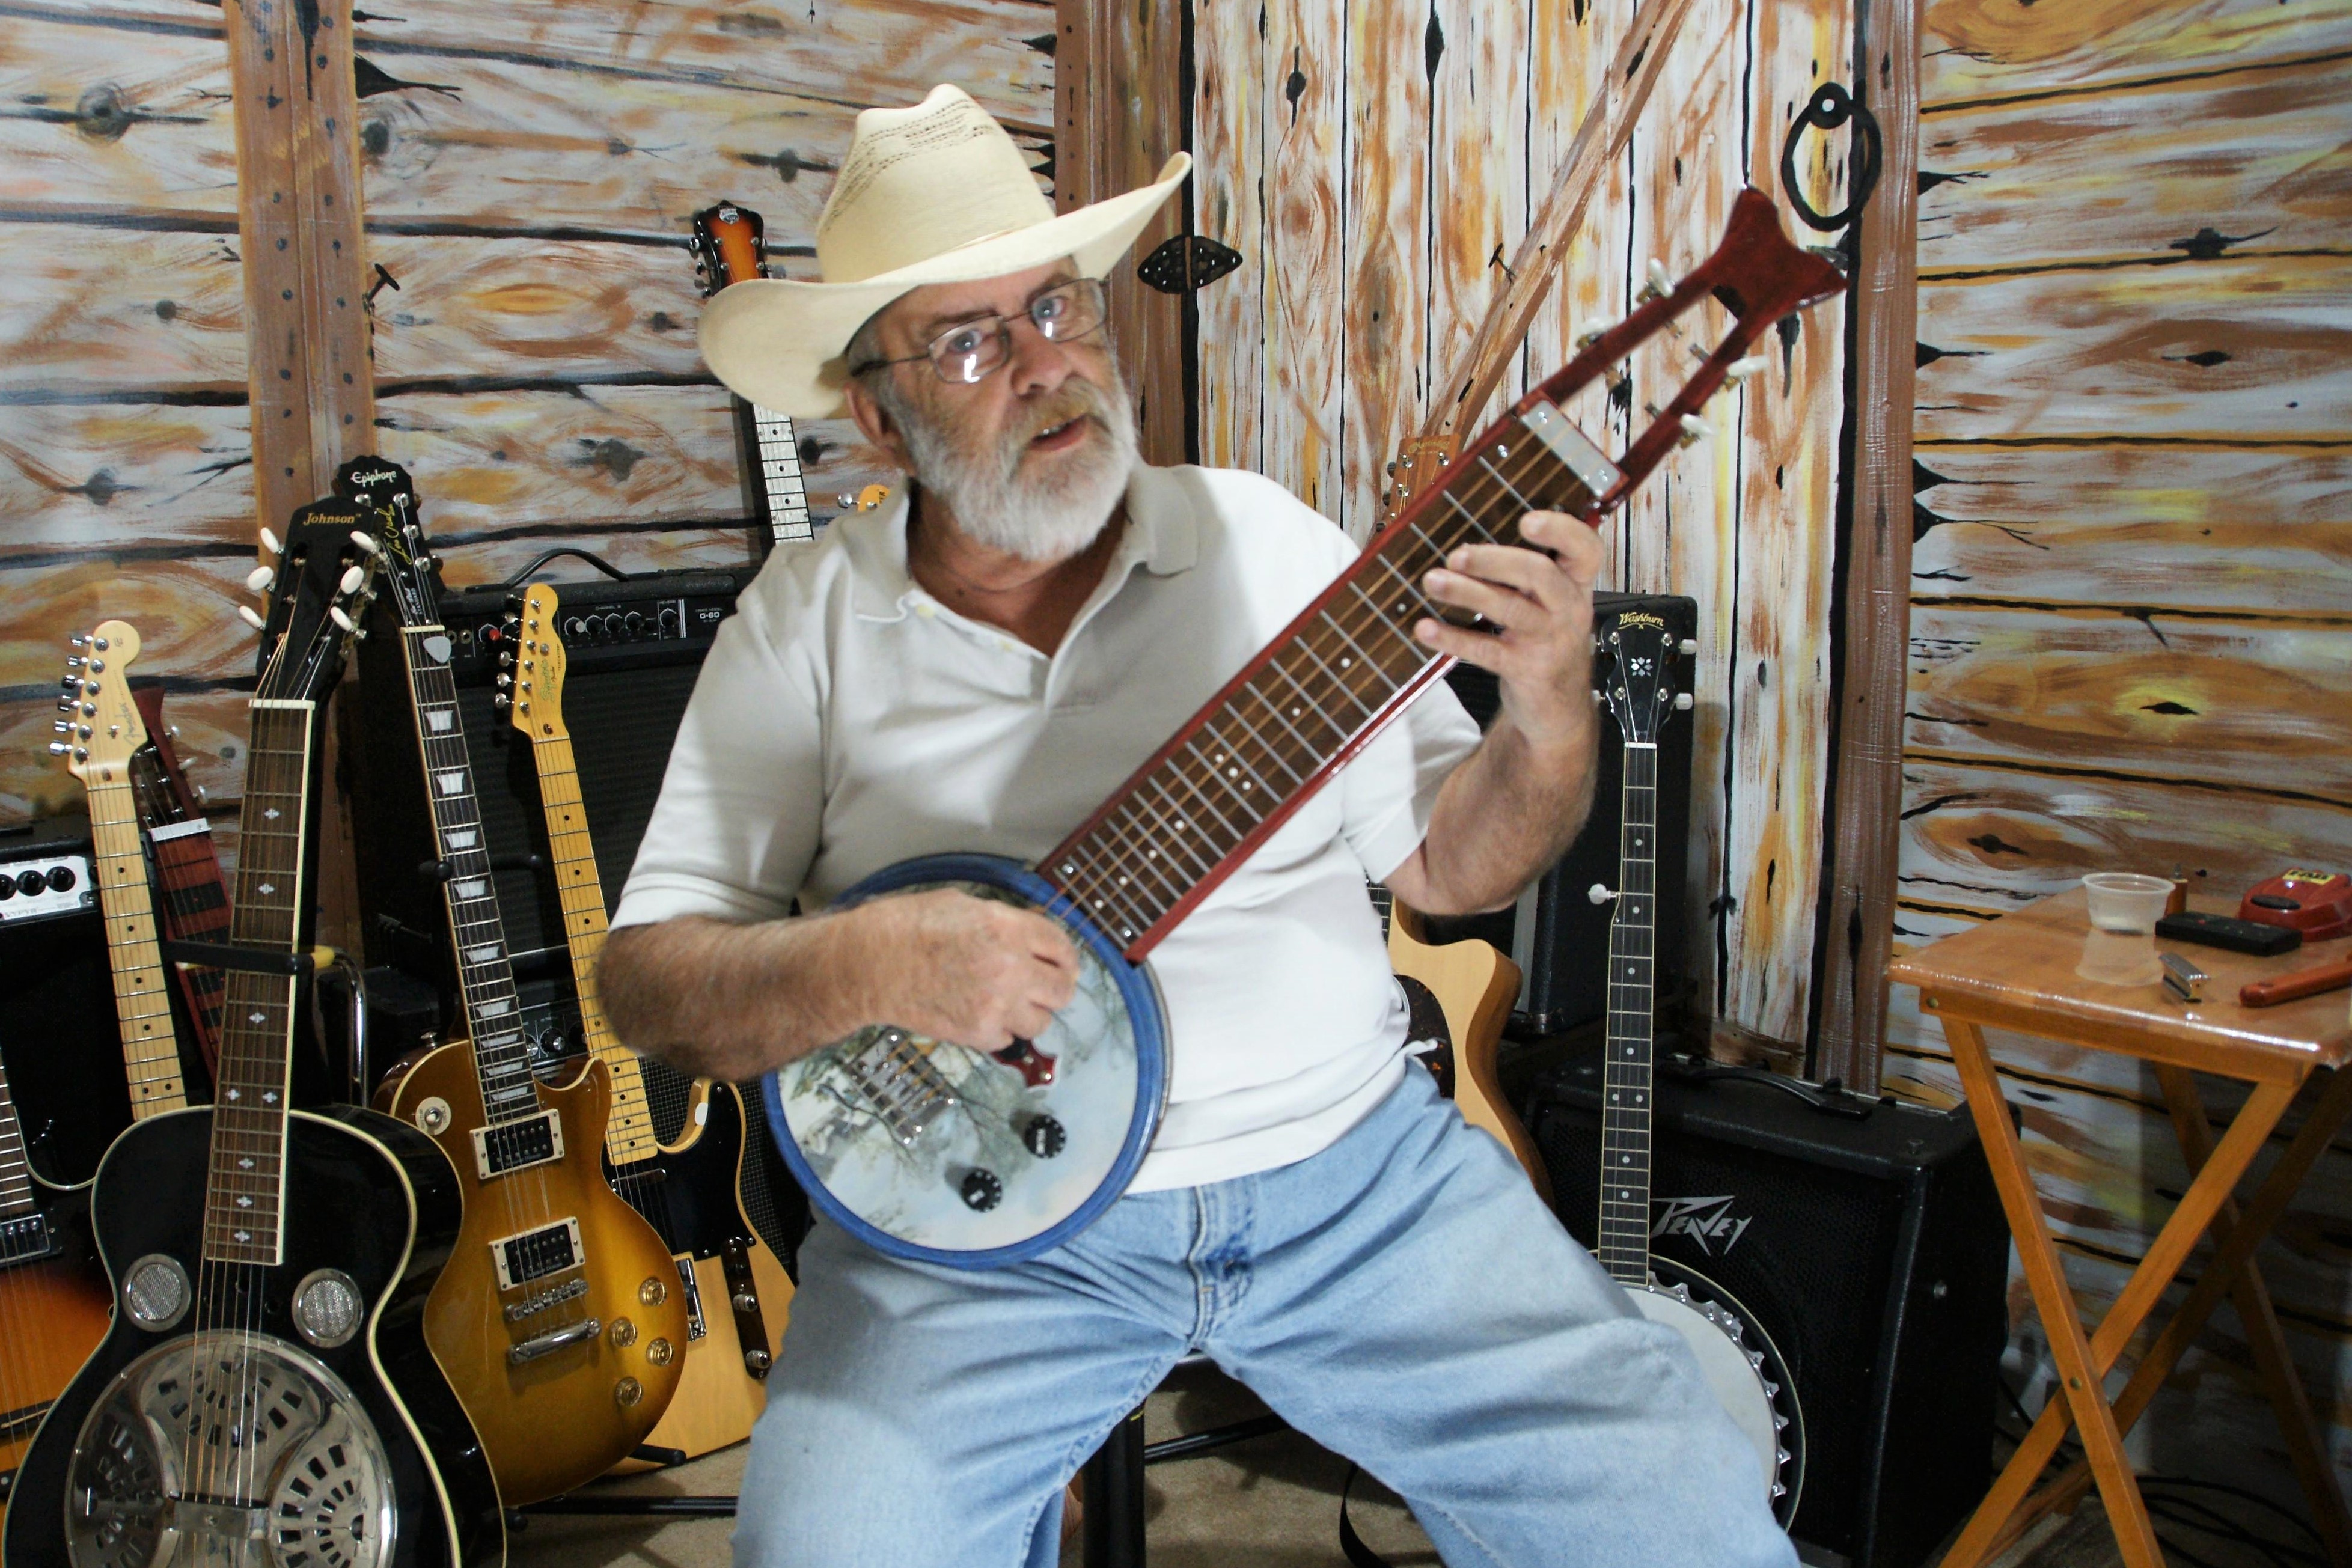 Danny J. with his 4-string cookie tin guitar